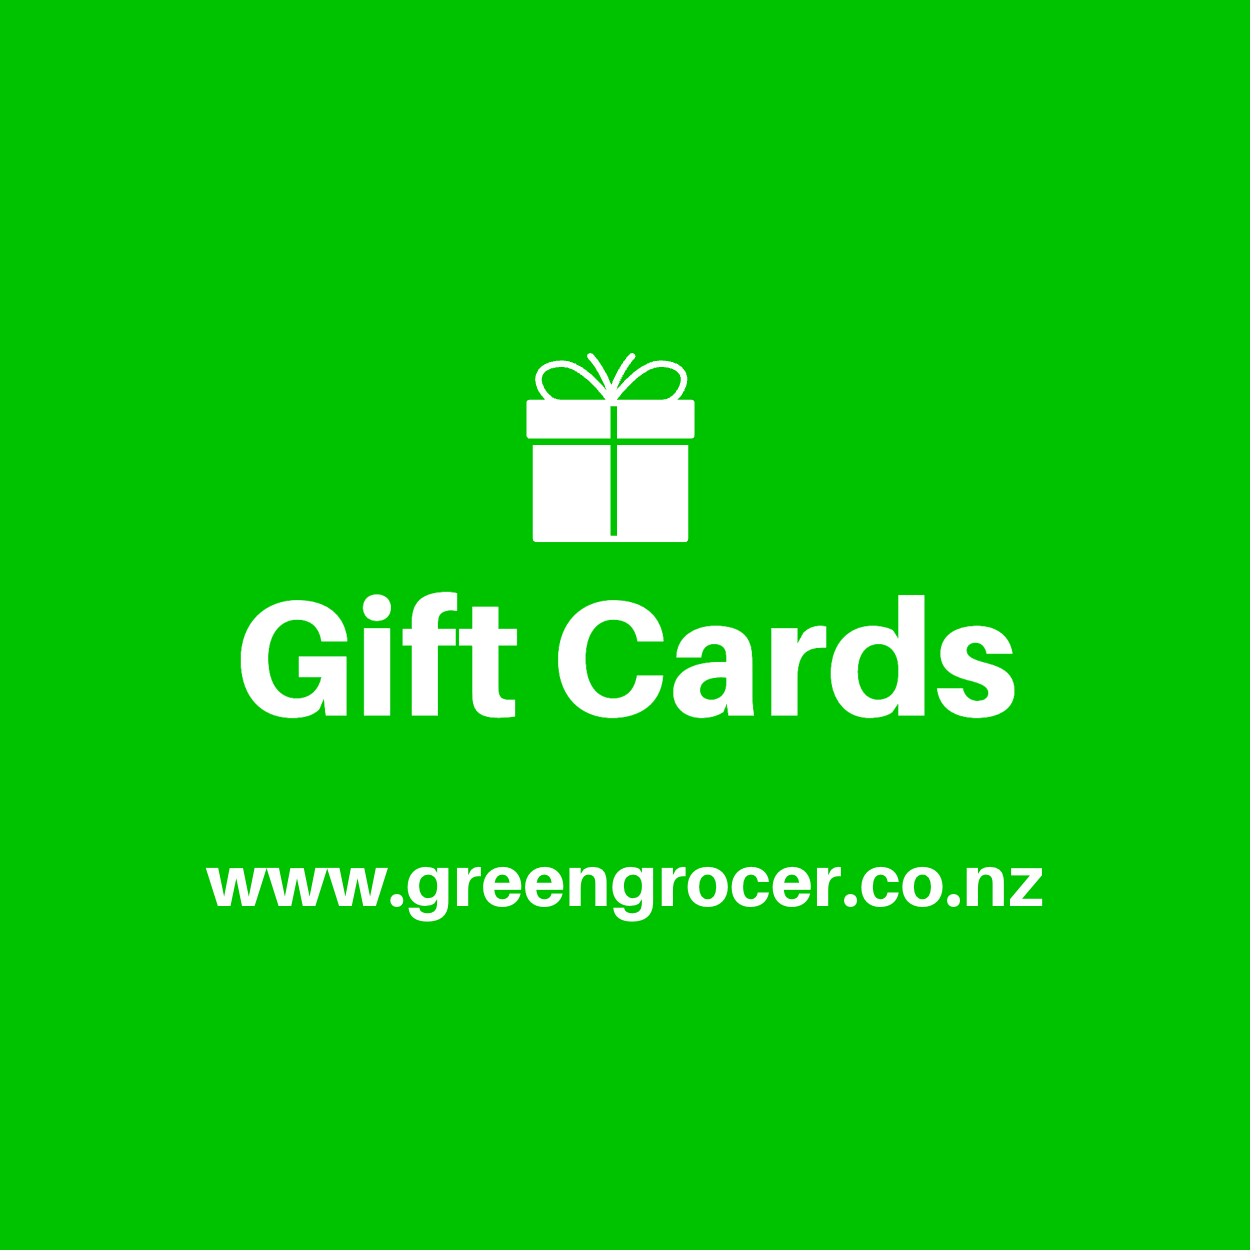 Greengrocer.co.nz Gift Card